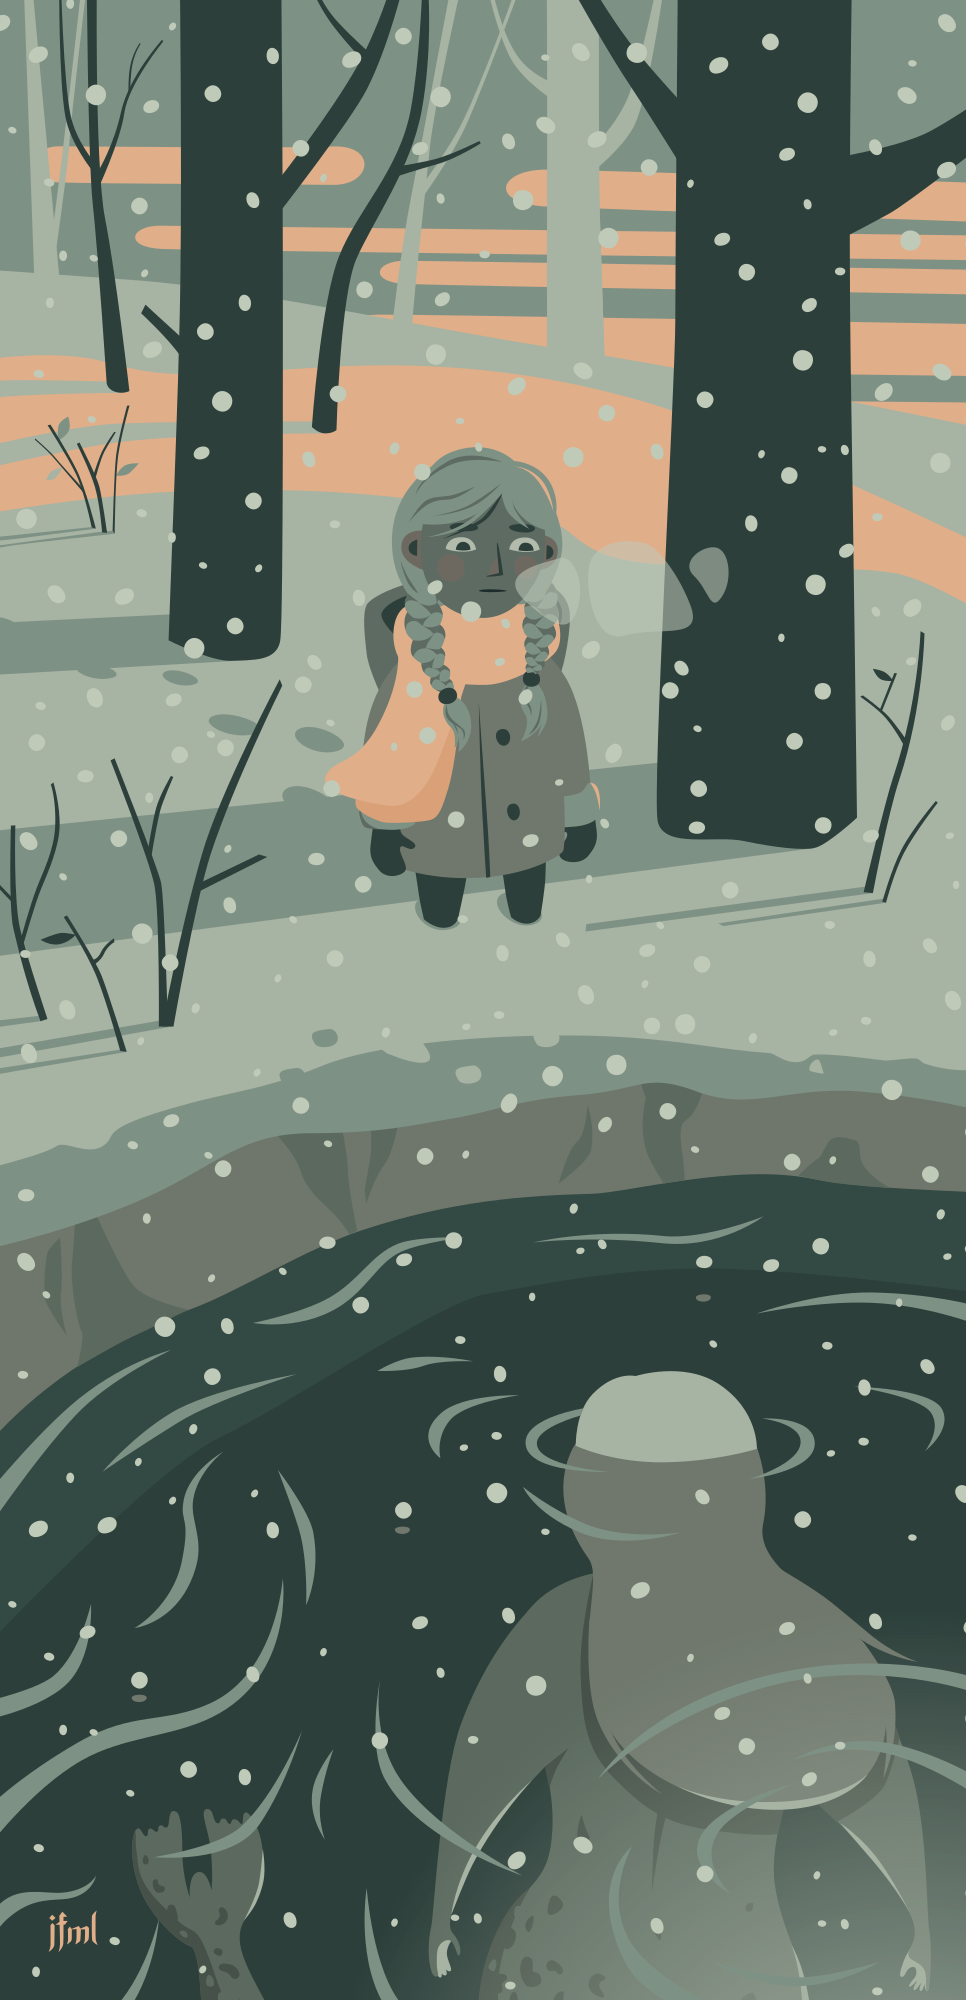 Vector illustration of a young, white child with long, braided hair standing on the edge of a lake in a snowy landscape. In the lake is a mermaid-creature with a seal-tail. The selkie is almost completely underwater only the top of their head is above the surface. There is an eerie glow coming from the bottom of the lake.